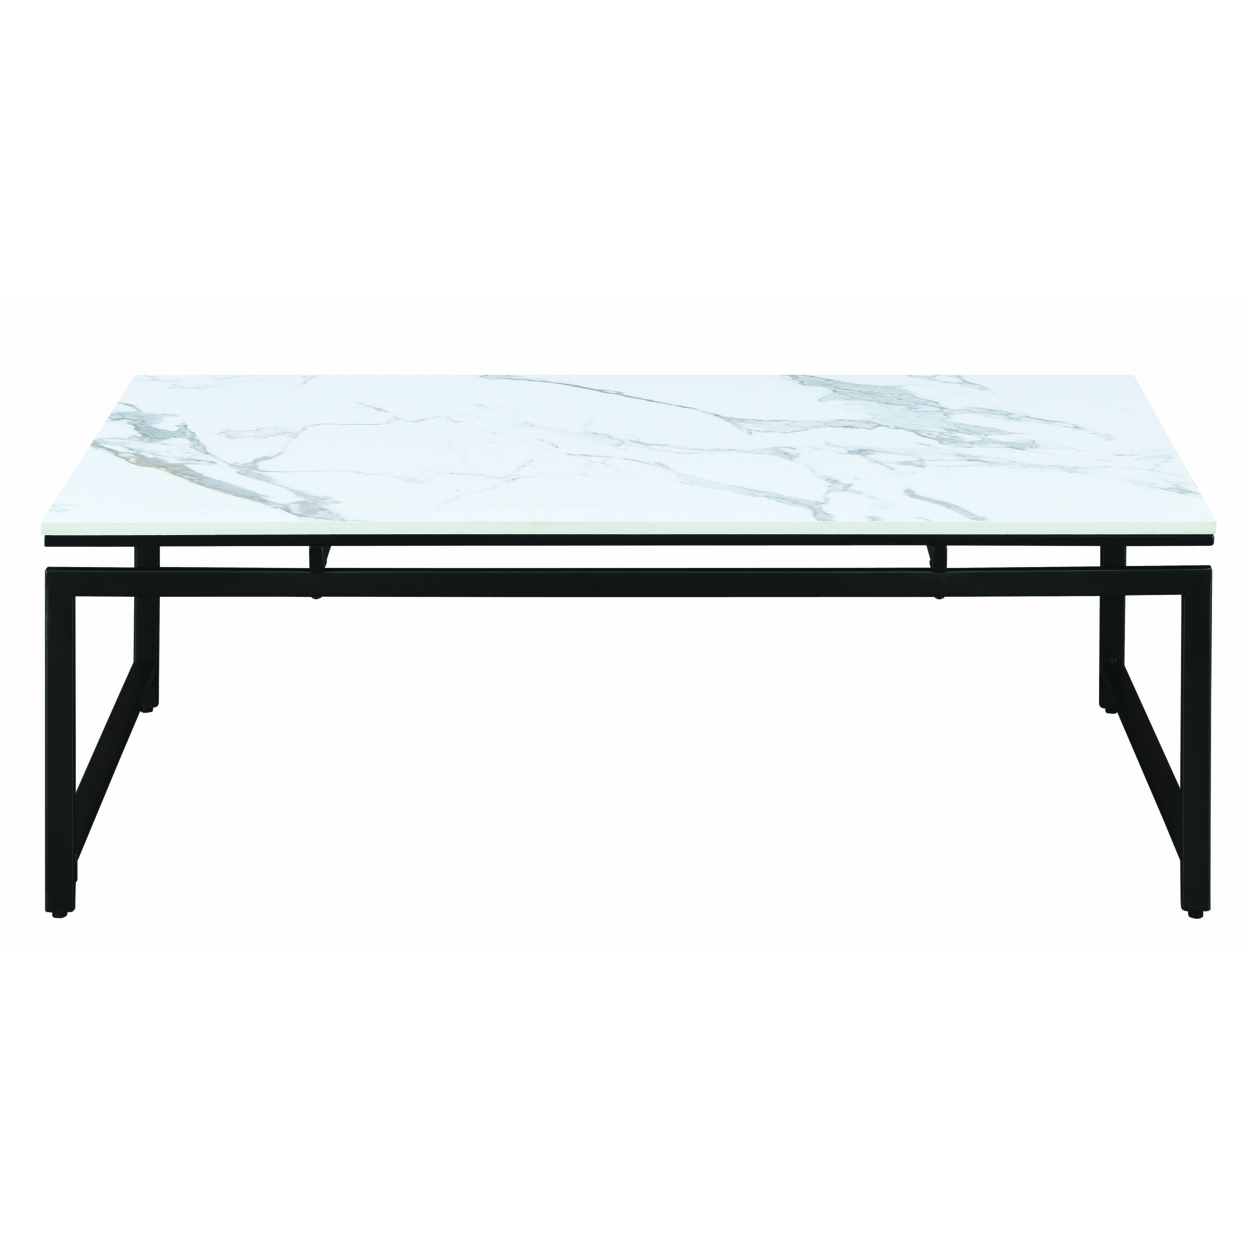 3 Piece Metal Base Occasional Table Set With Faux Marble Top, Black And White- Saltoro Sherpi